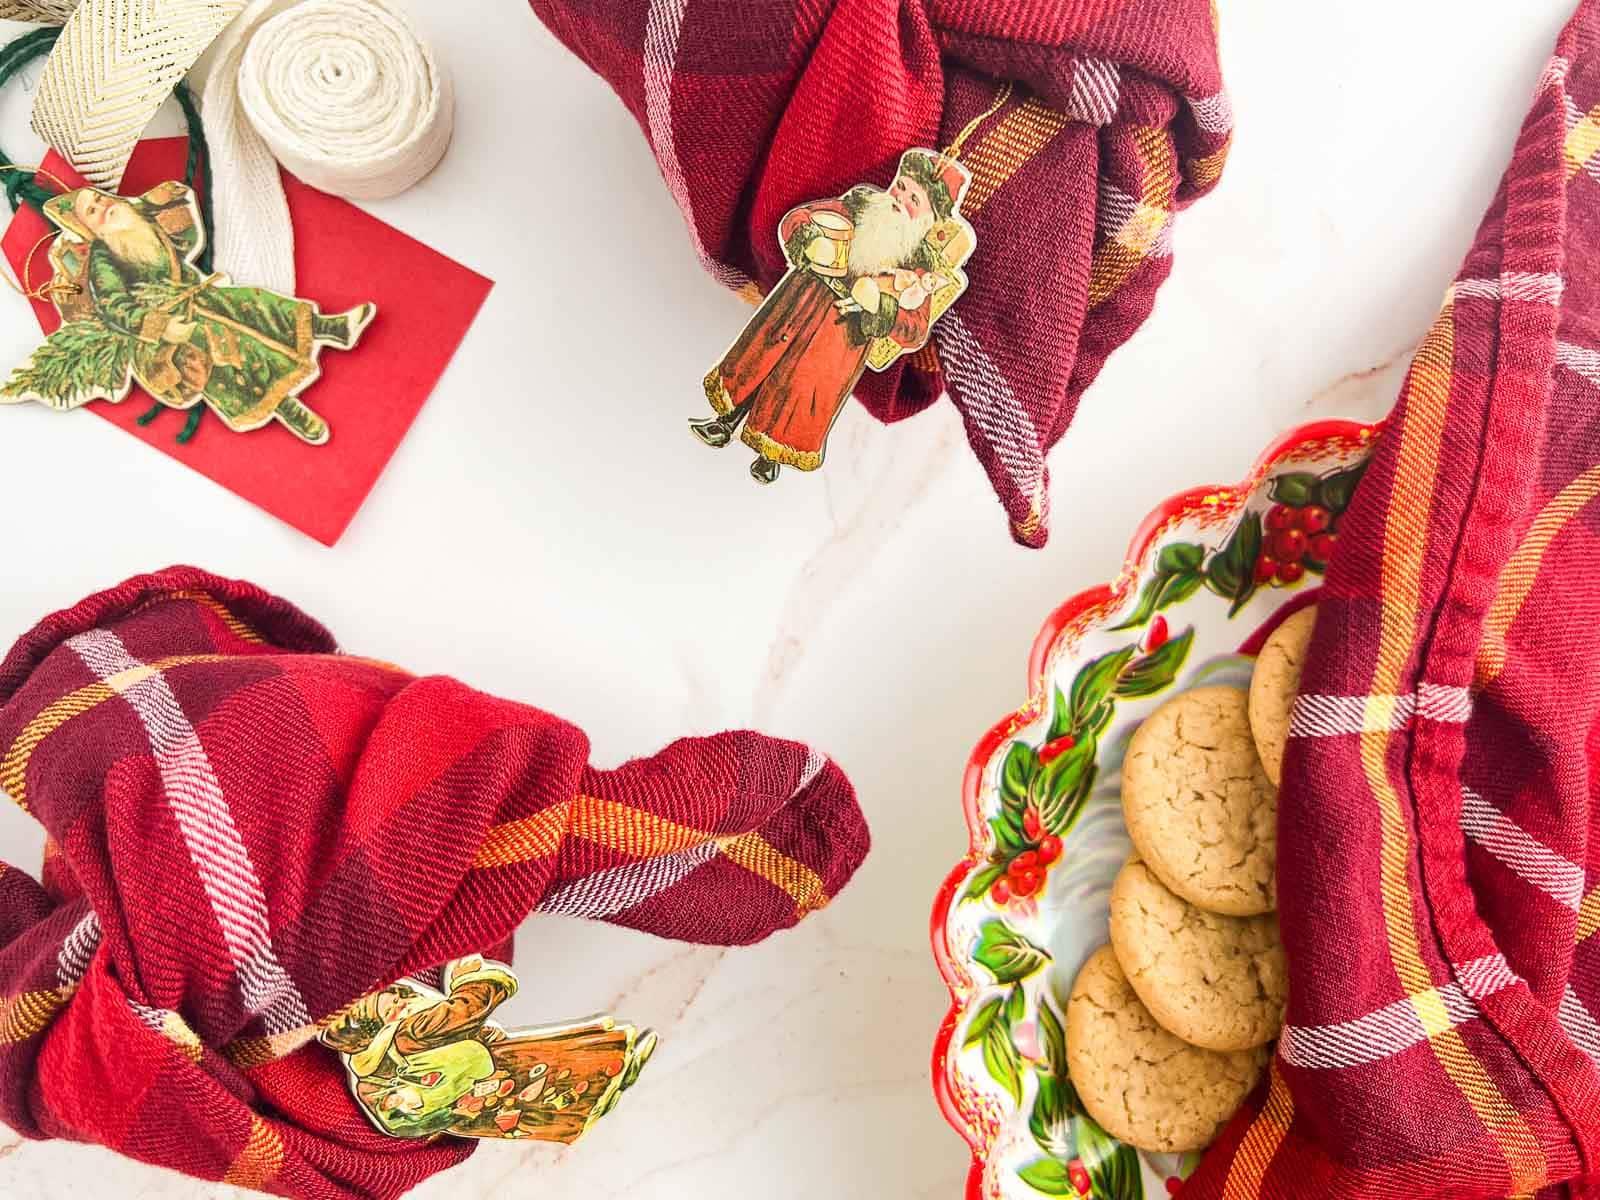 Cookies wrapped in cotton napkins, and cookies on a tray with a napkin draped over top.